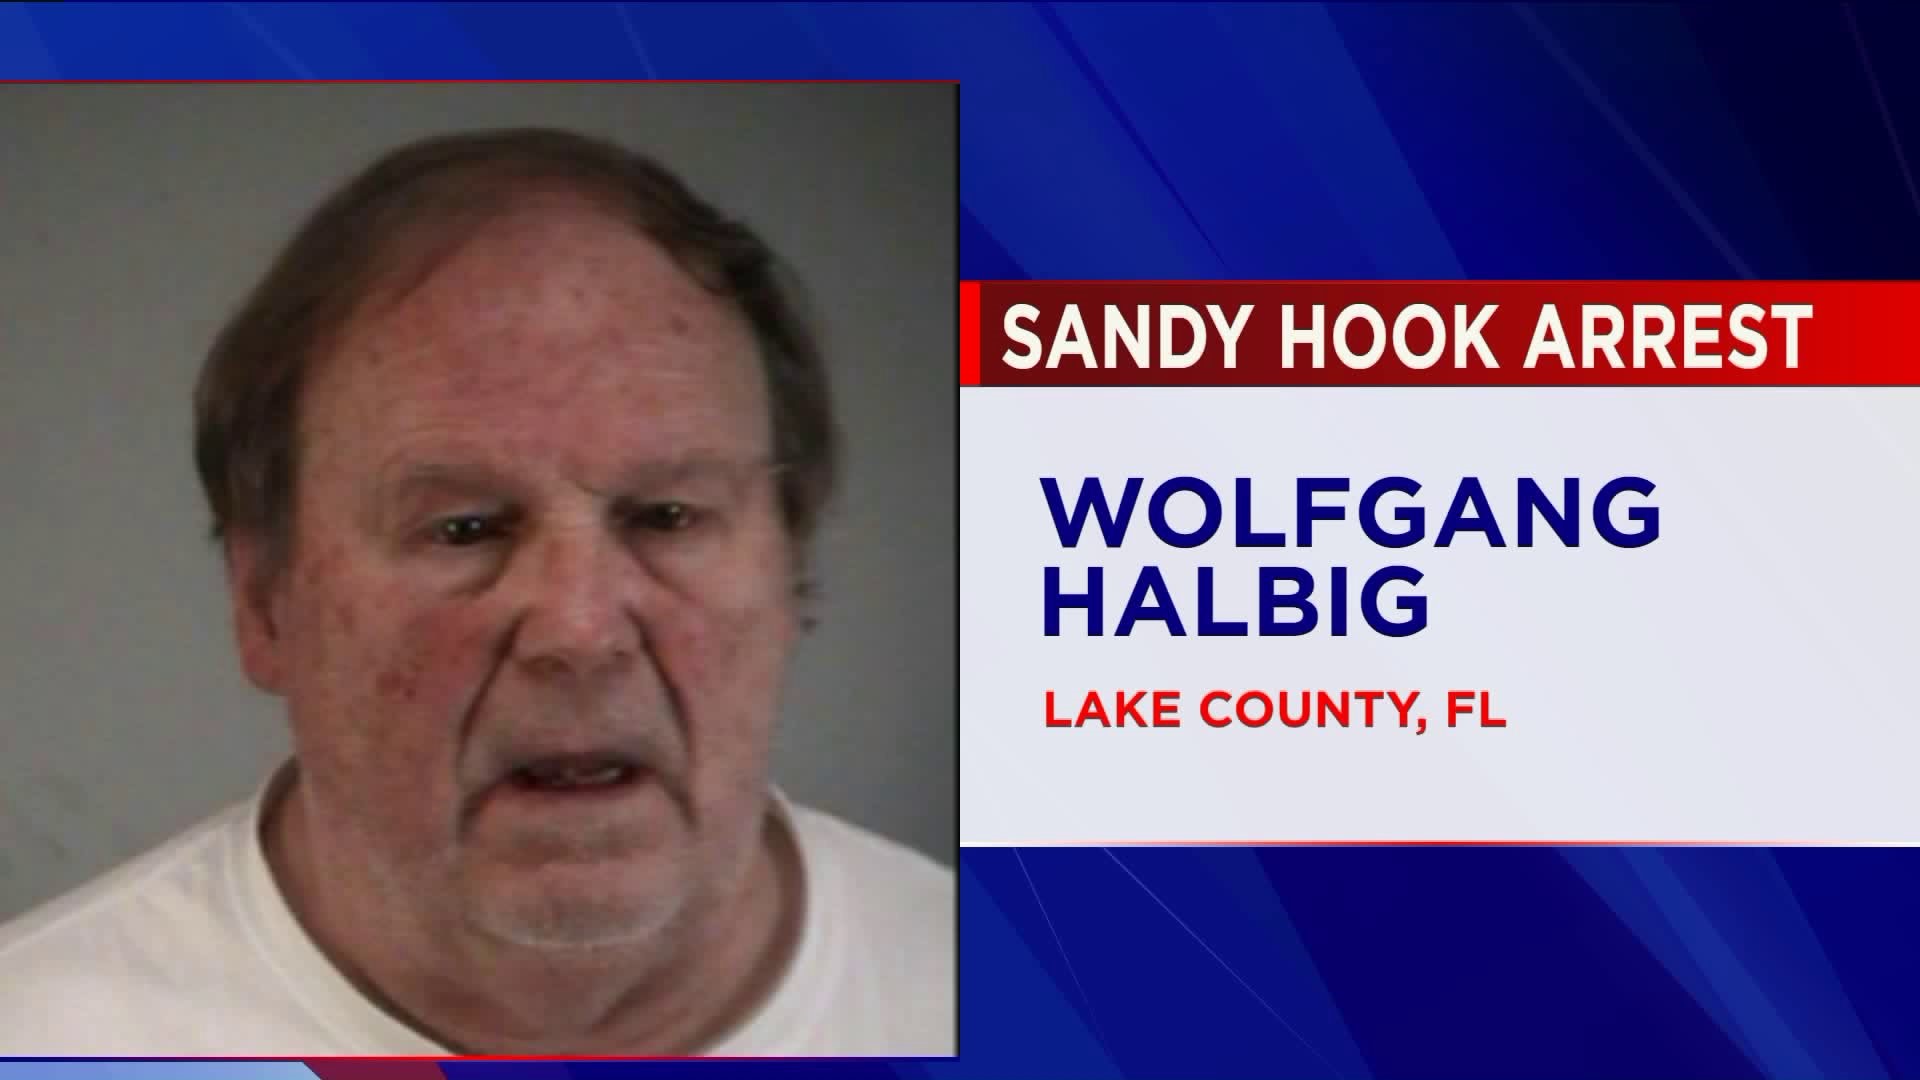 Florida man, Wolfgang Halbig, arrested and accused of tormenting Sandy Hook families